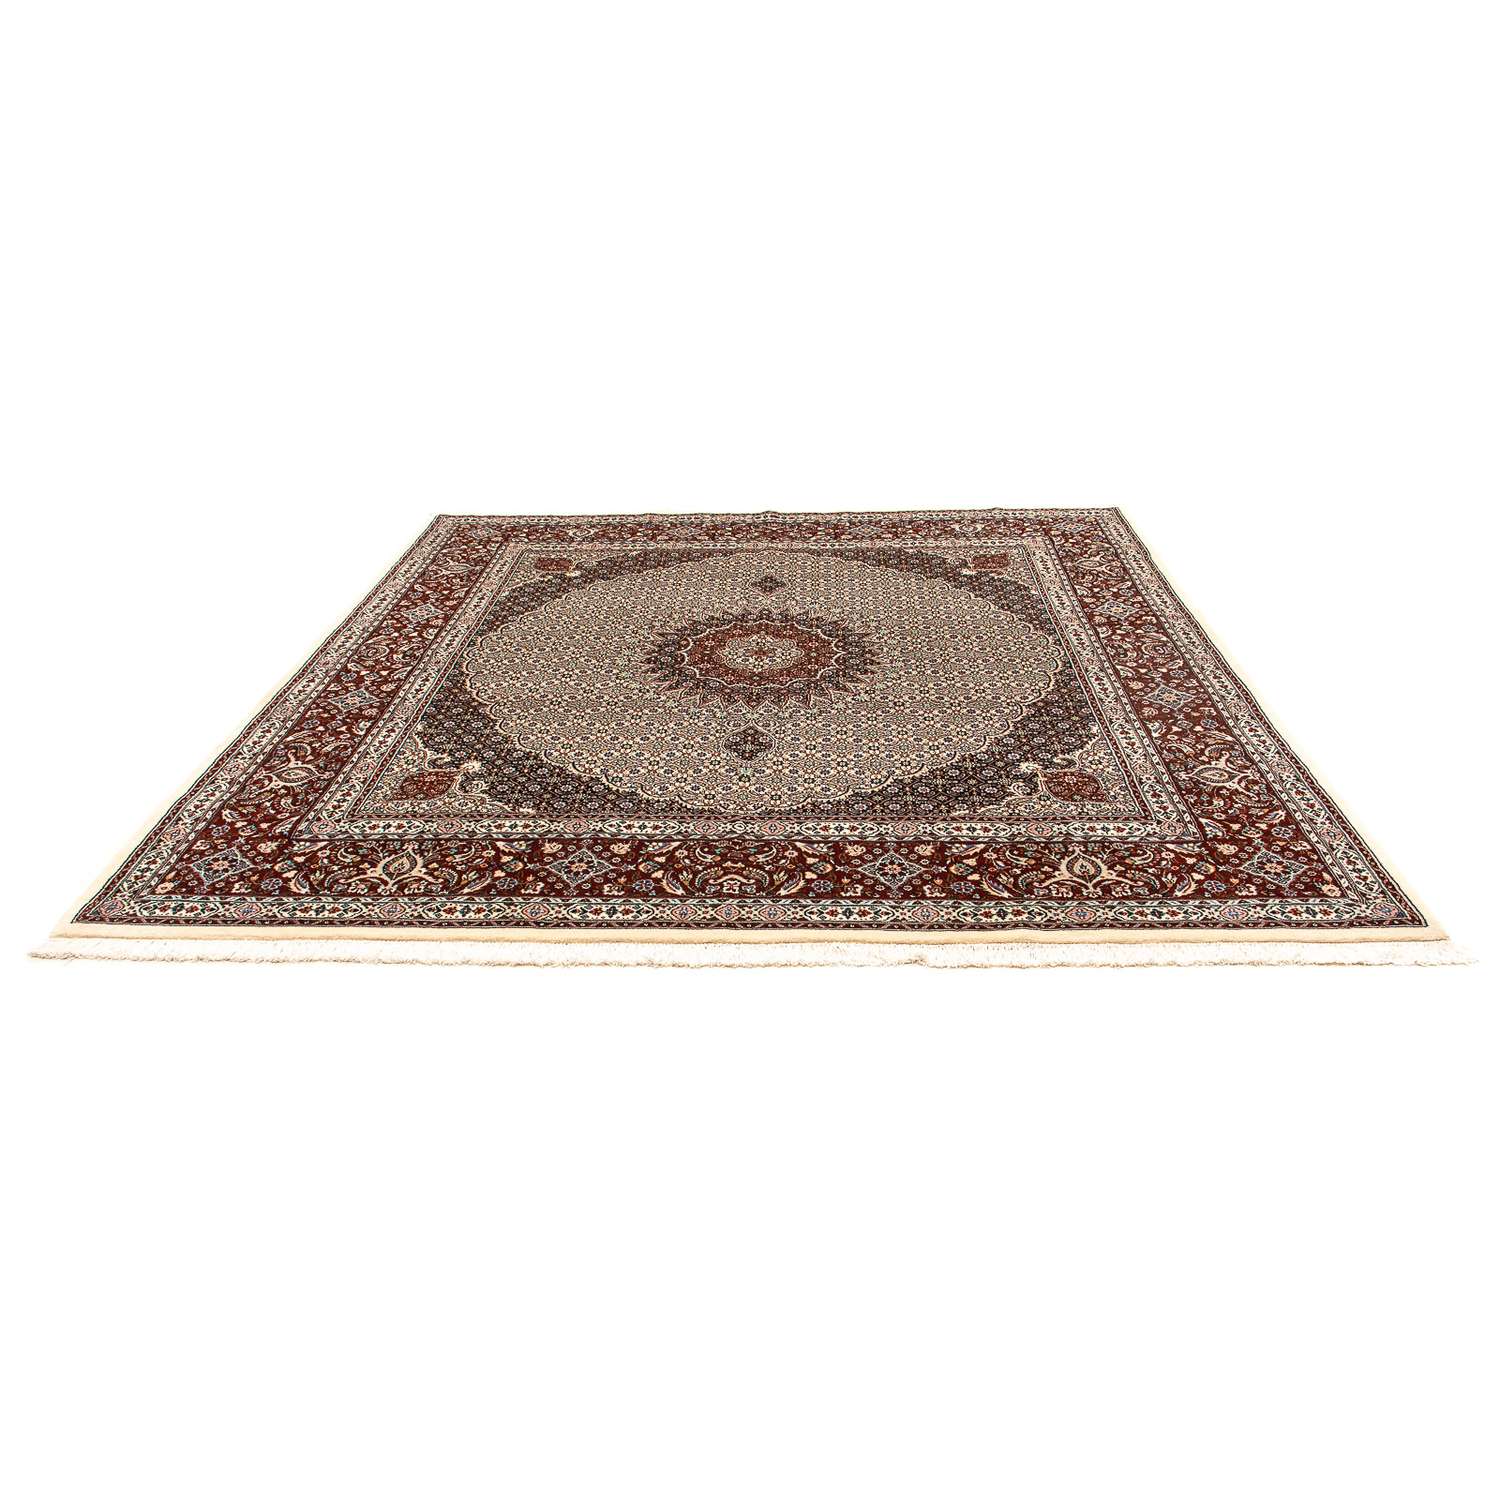 Perser Rug - Classic square  - 262 x 250 cm - light brown